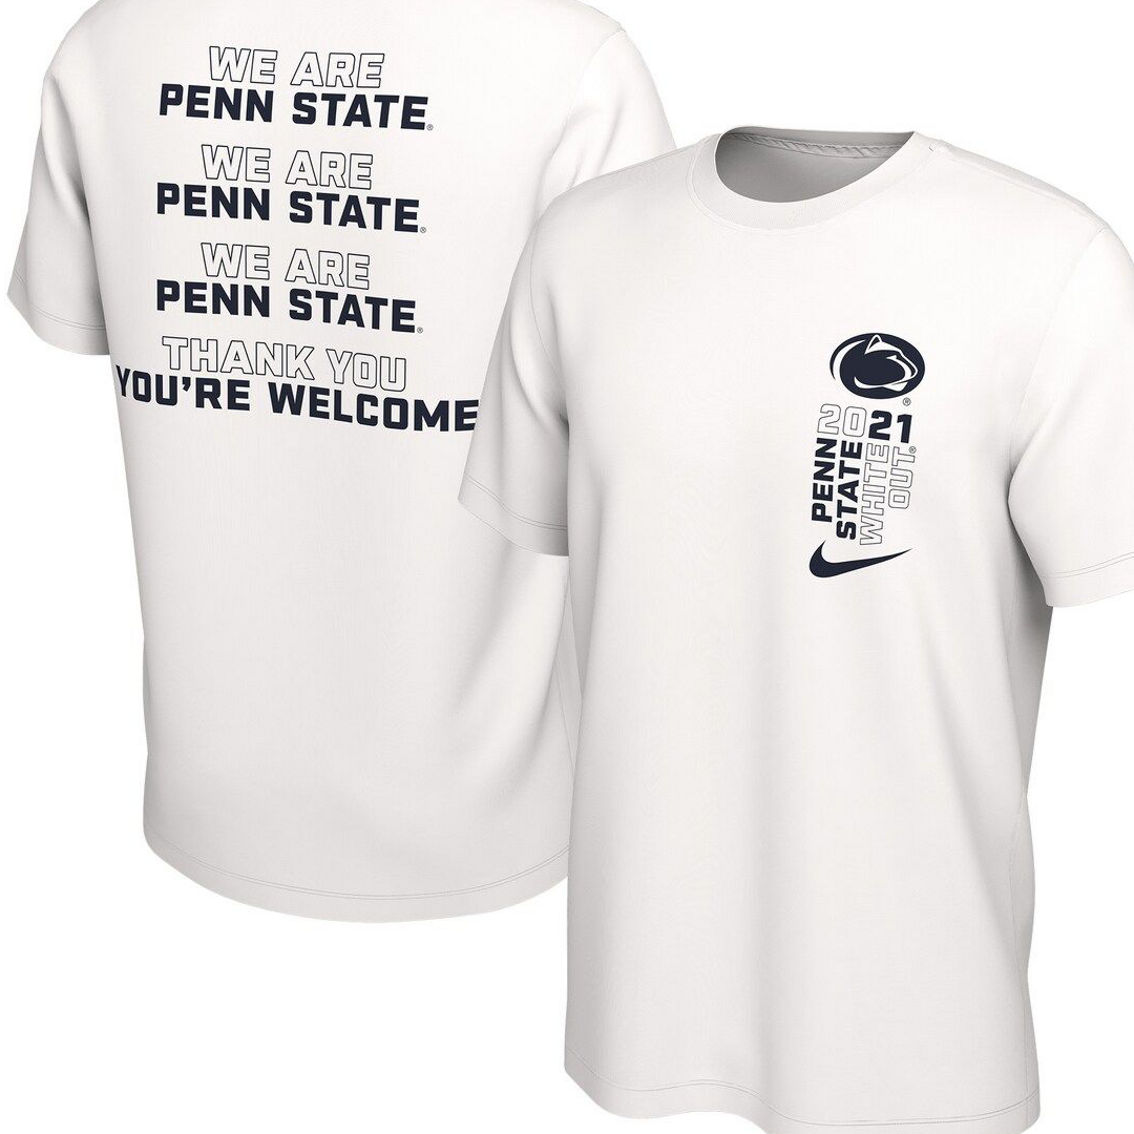 Nike Men's White Penn State Nittany Lions 2021 White Out Student T-Shirt - Image 2 of 4